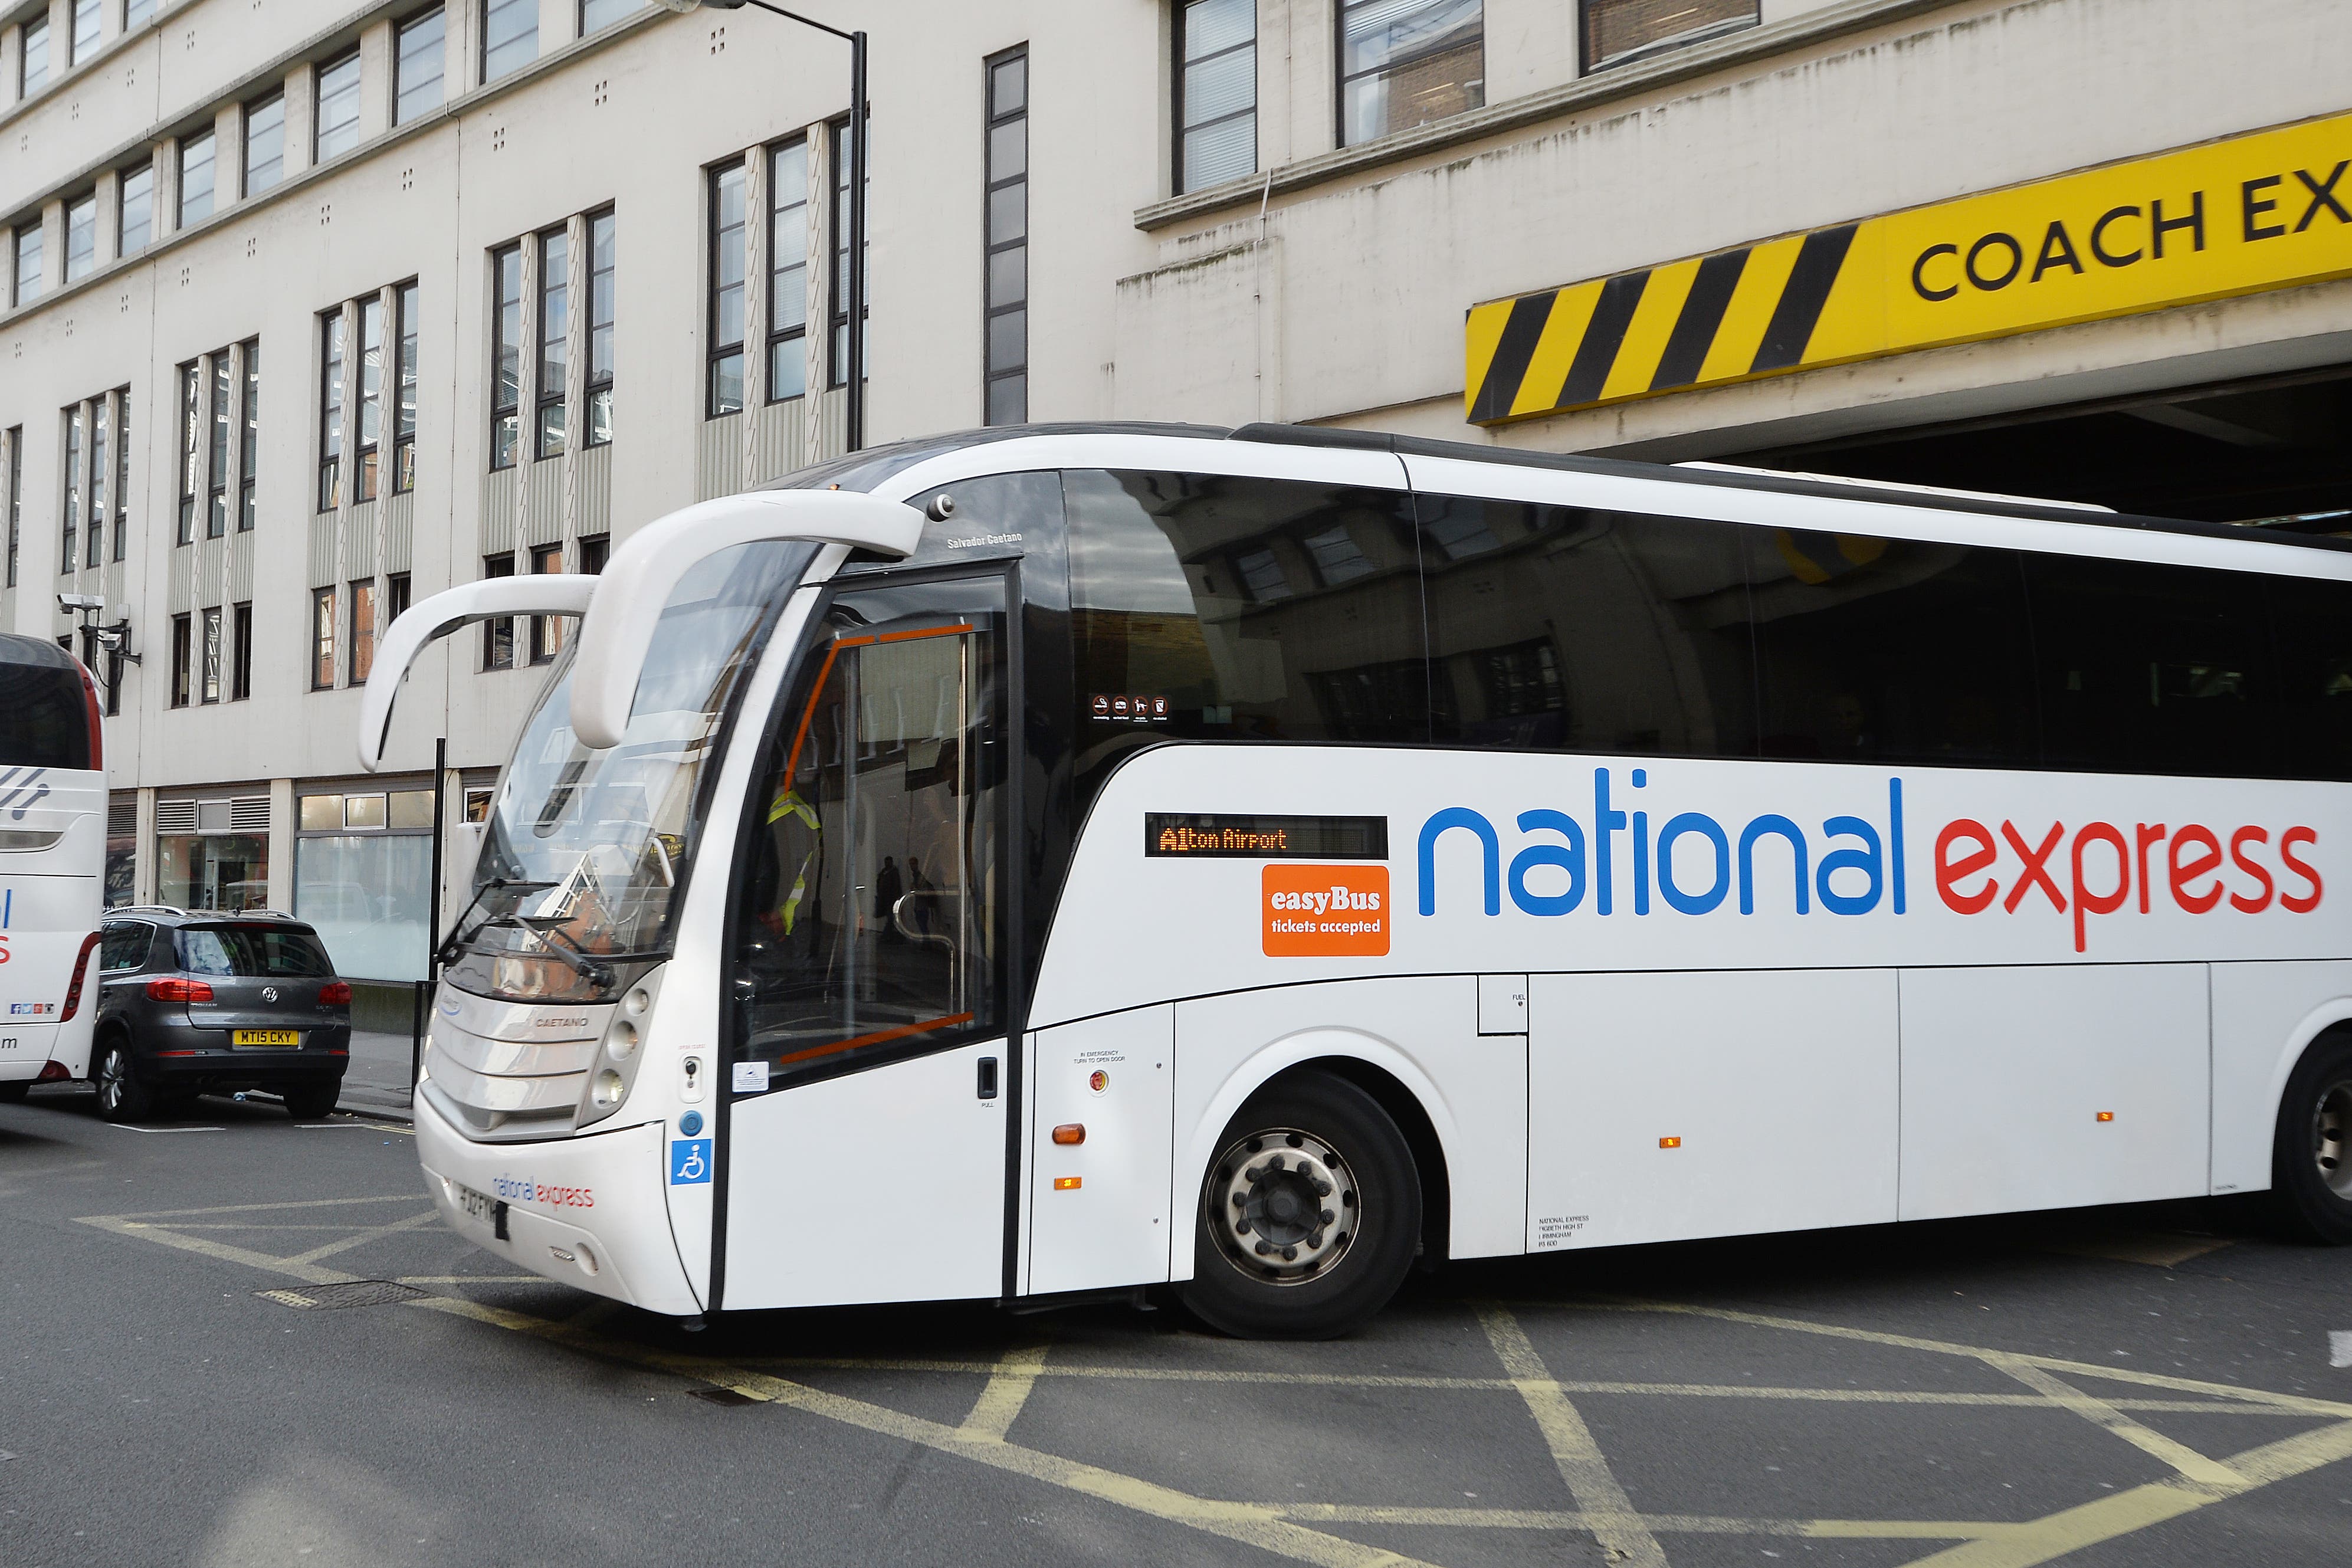 plans 15 new routes and adds 130 to fleet | The Independent